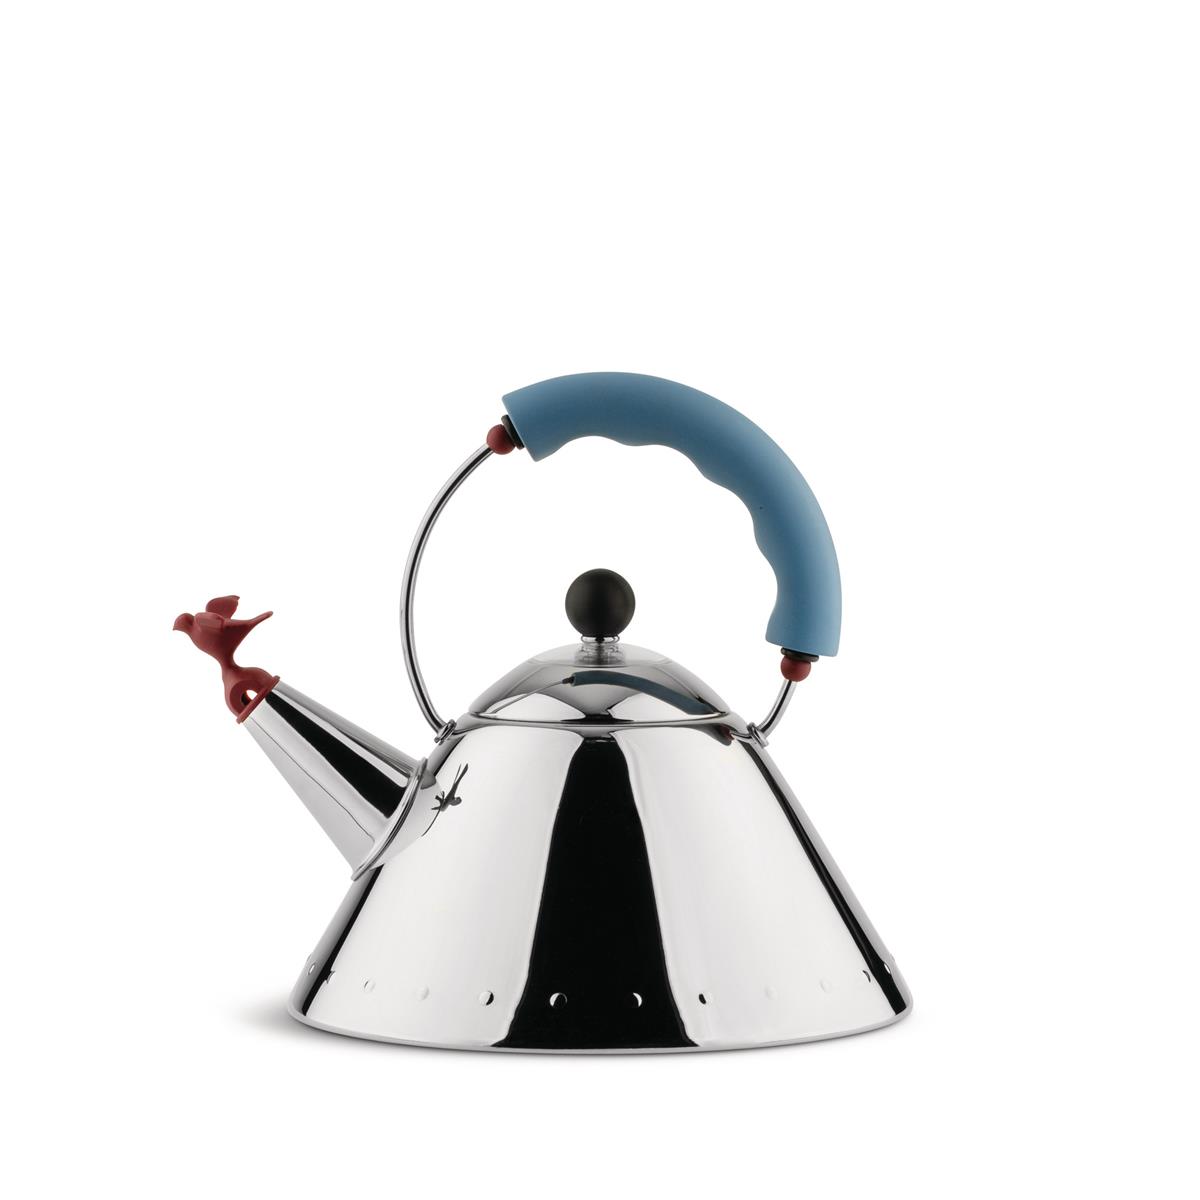 photo kettle in 18/10 polished stainless steel suitable for induction